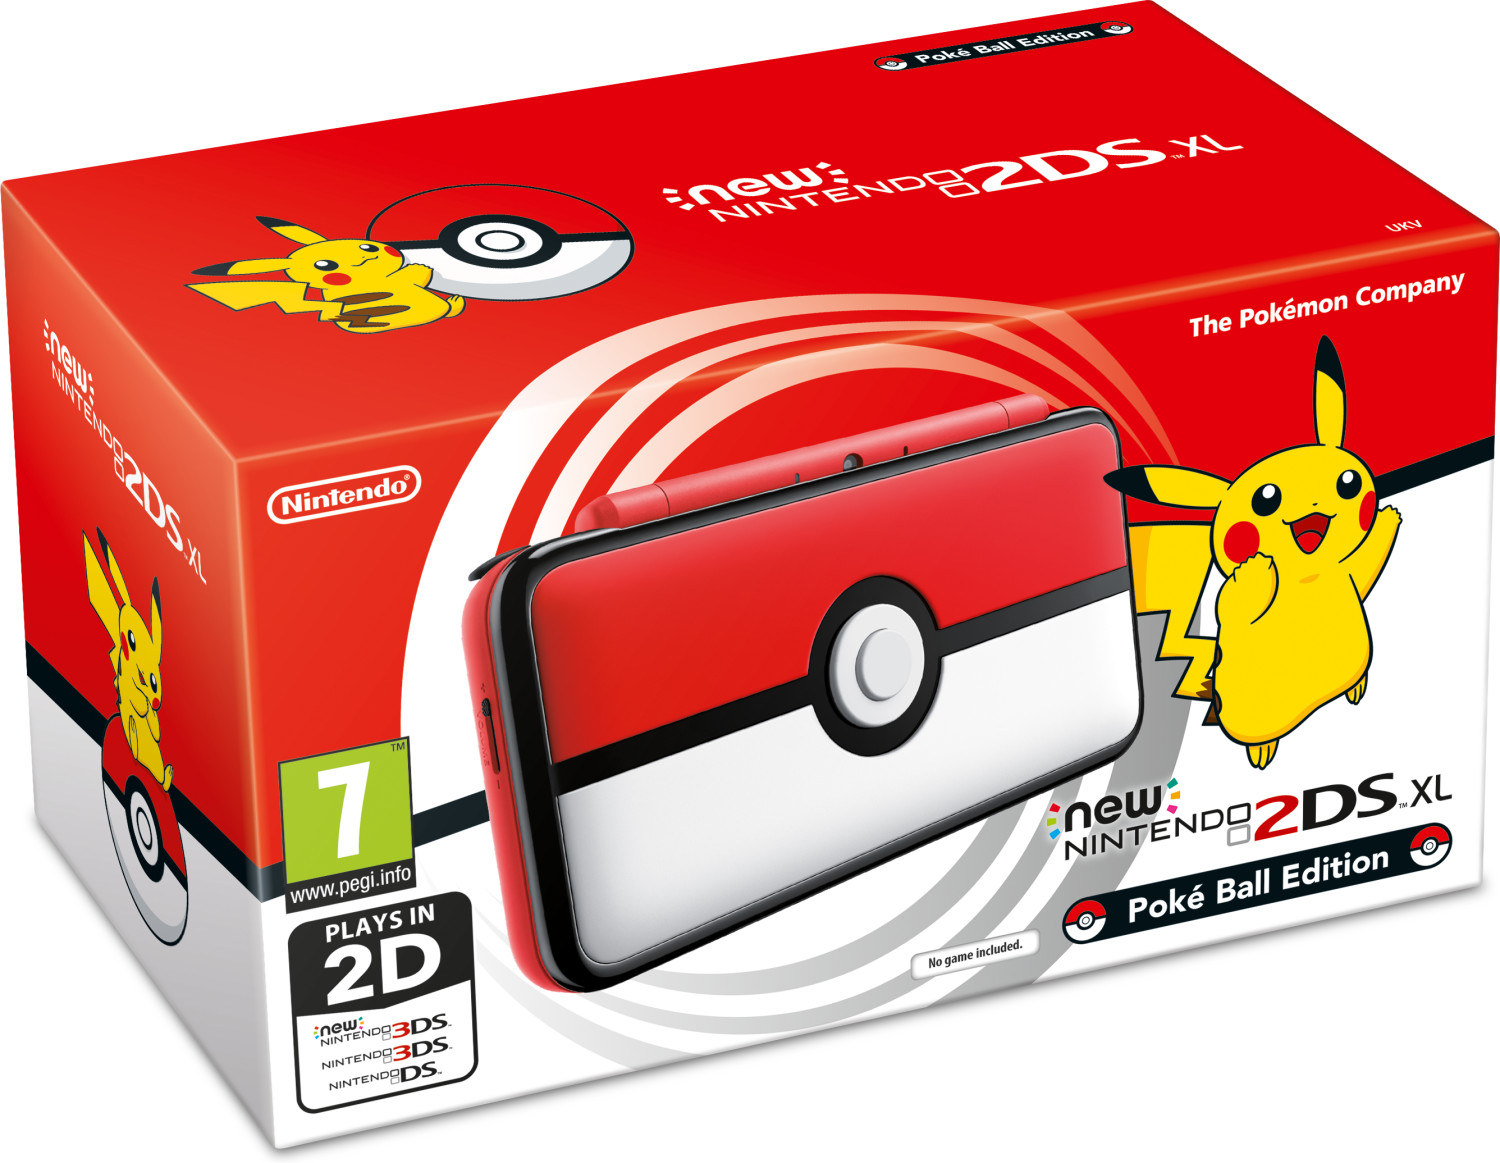 Buy Nintendo DS XL Pokéball Edition from Today Best Deals on idealo co uk